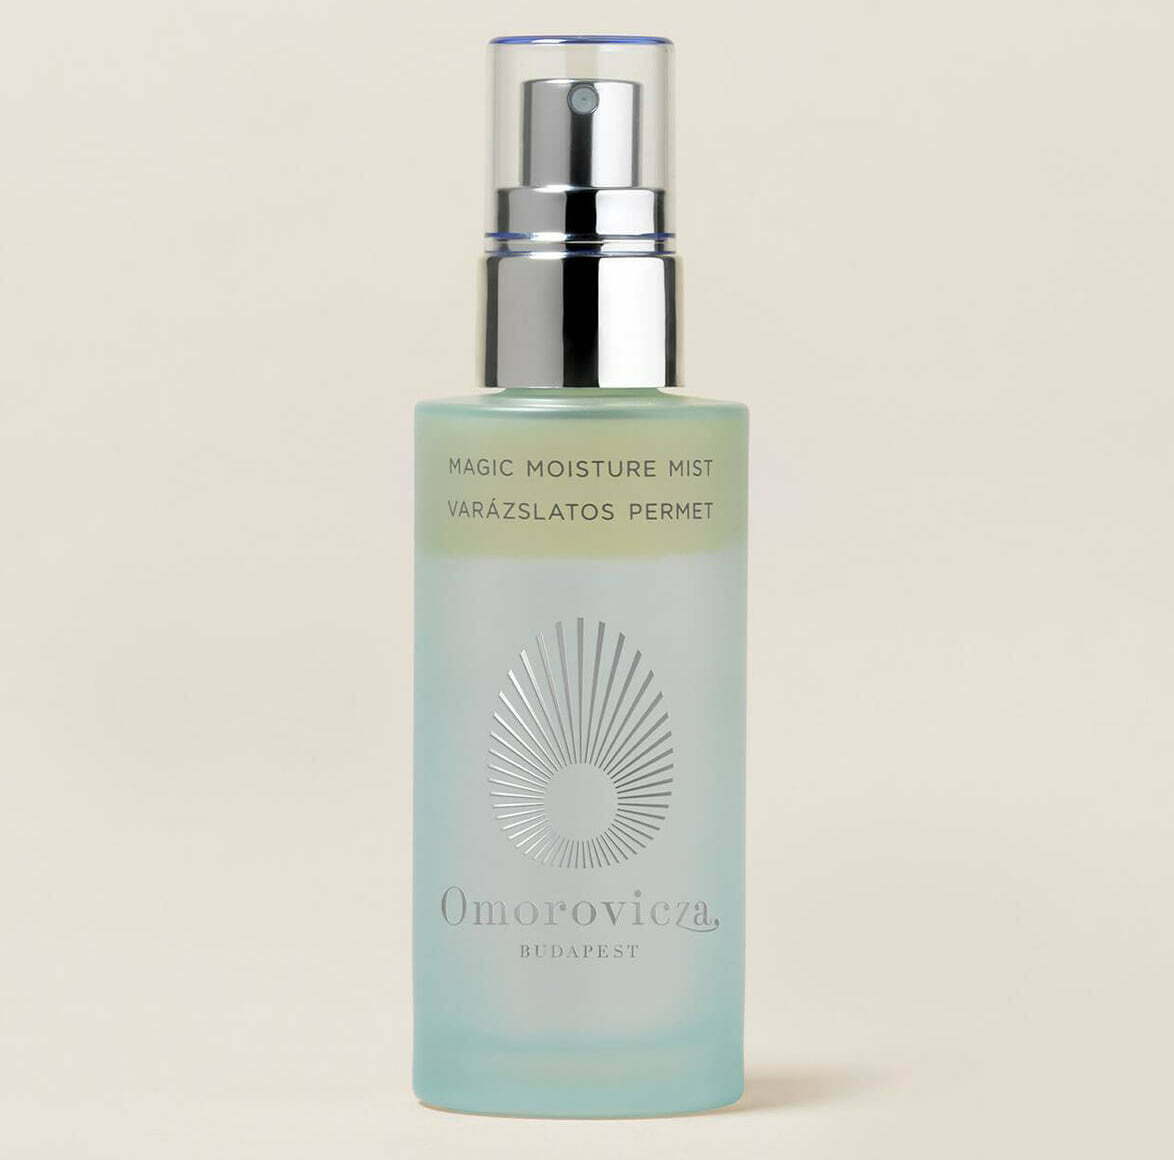 15% off sitewide at Omorovicza + free Magic Moisture Mist